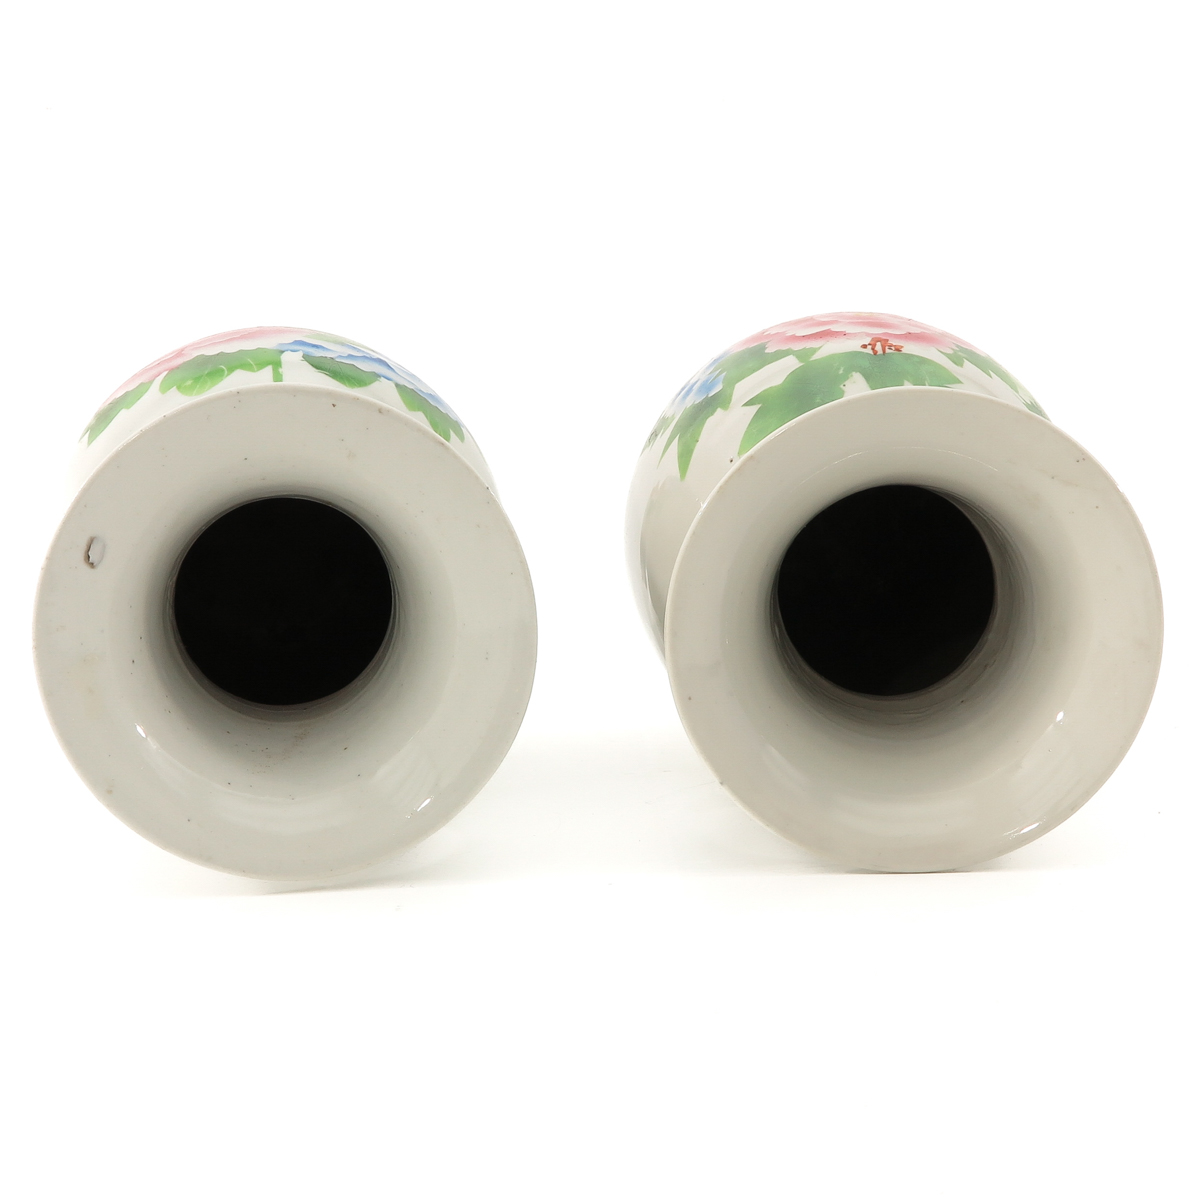 A Pair of Polychrome Decor Vases - Image 5 of 10